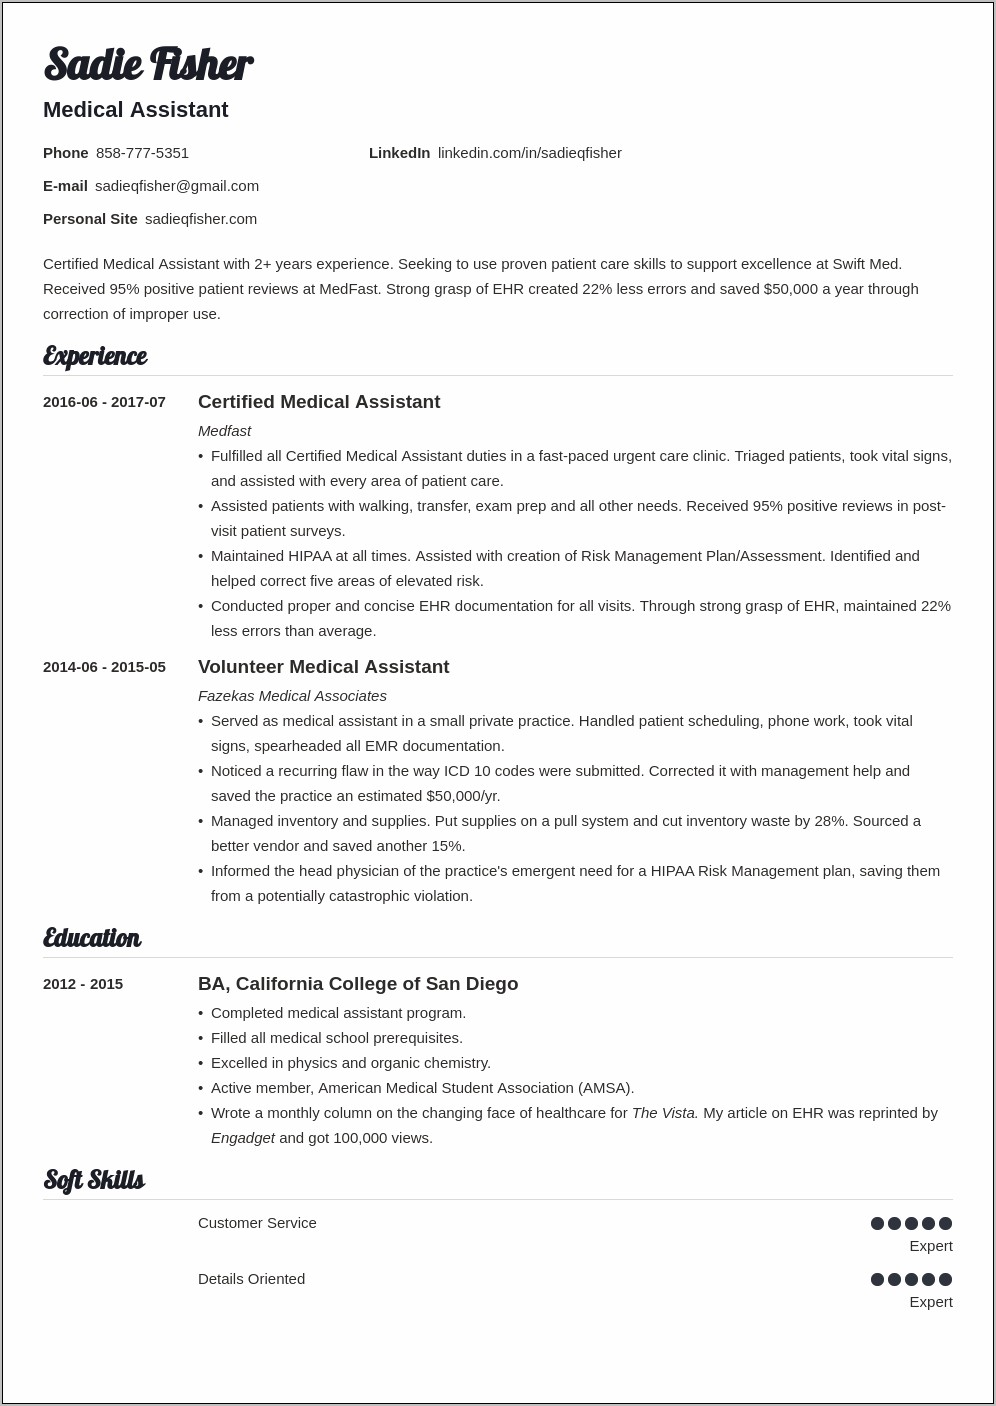 Professional Summary On Resume For Medical Assistant